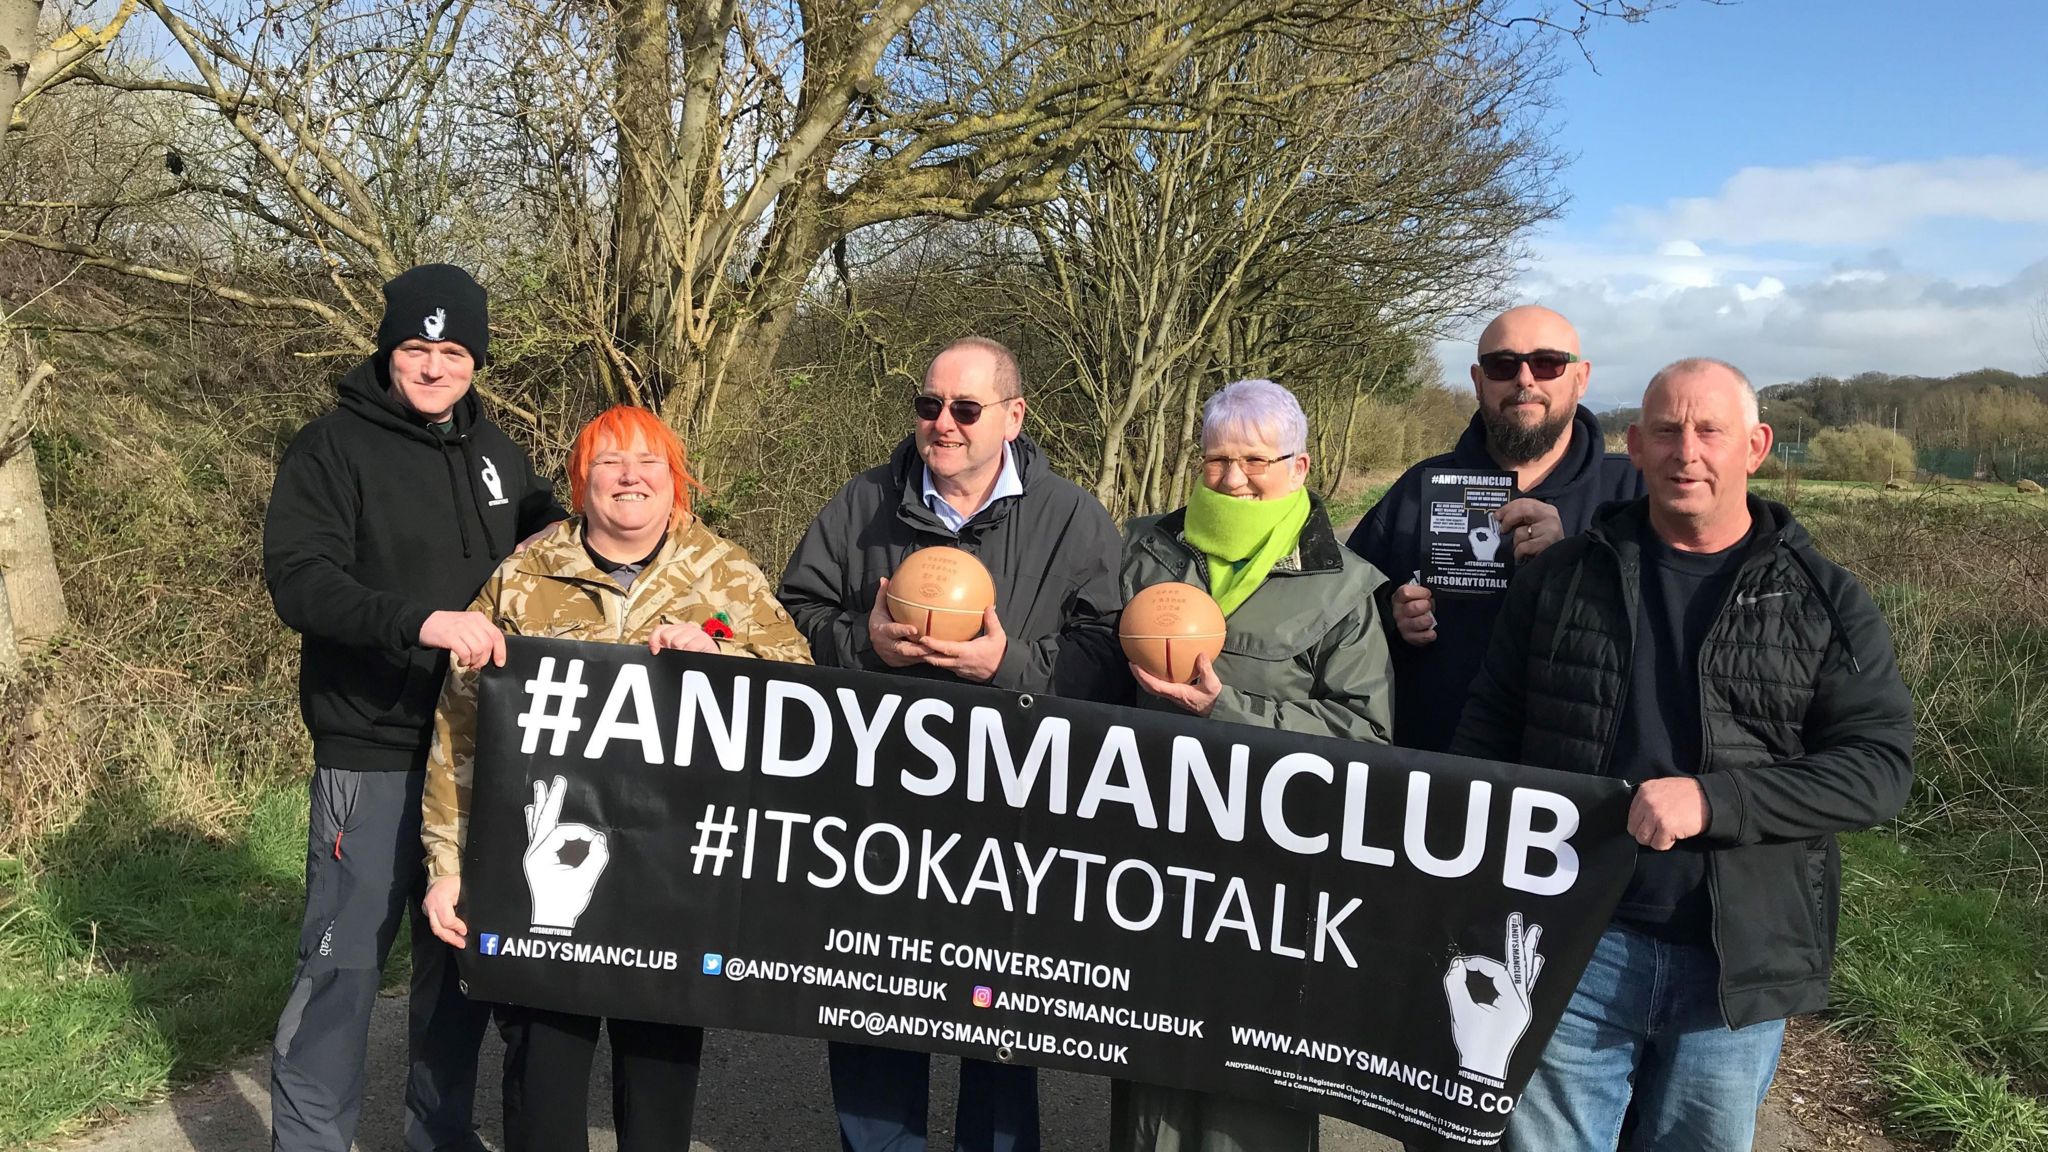 Players and supporters holding the Andy's Man Club banner